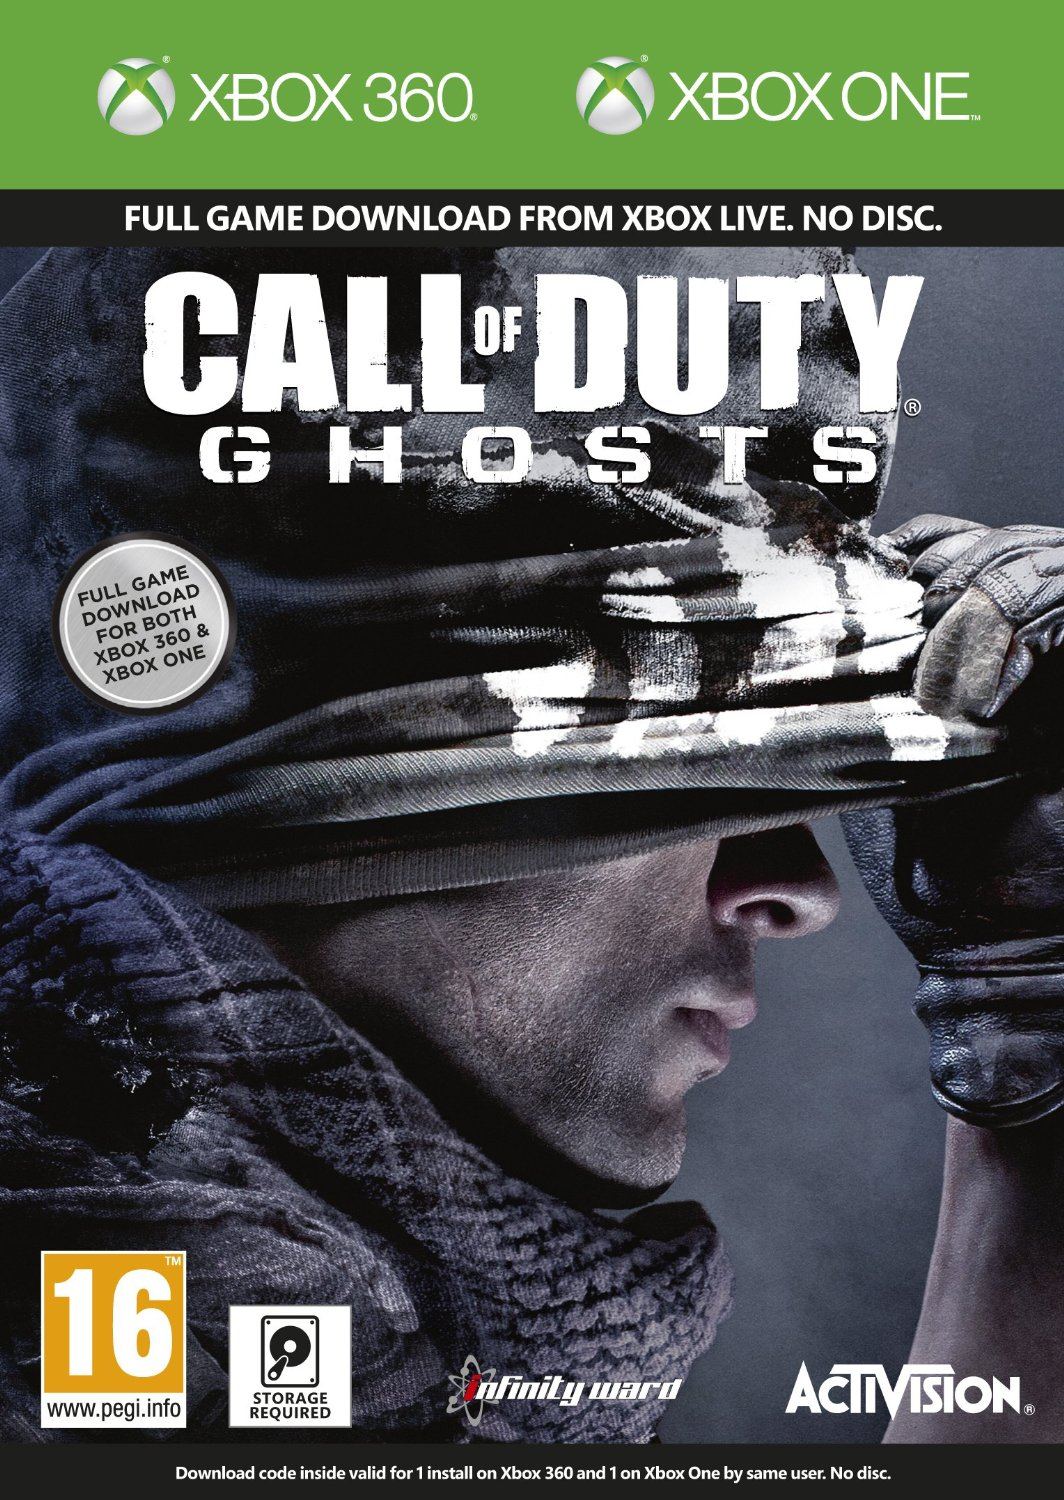 Call Of Duty Ghosts, Advanced Warfare 2-Poster Lot Official Promo Poster